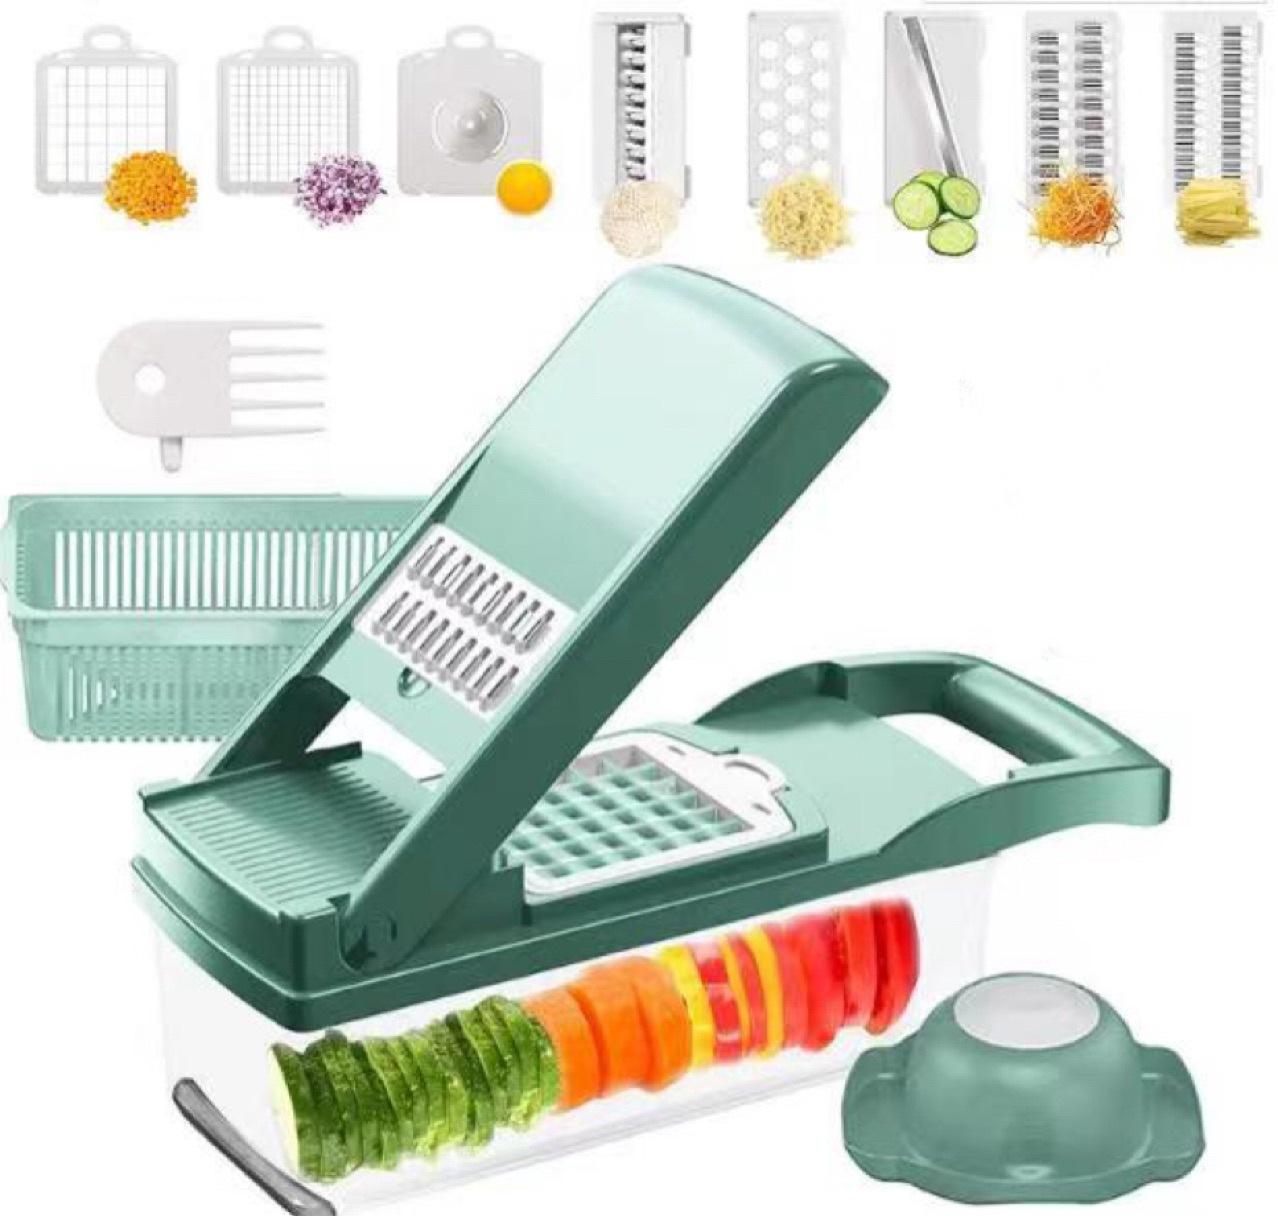 🥦 Multipurpose Vegetable Cutter 12 Types of Cutting in 1